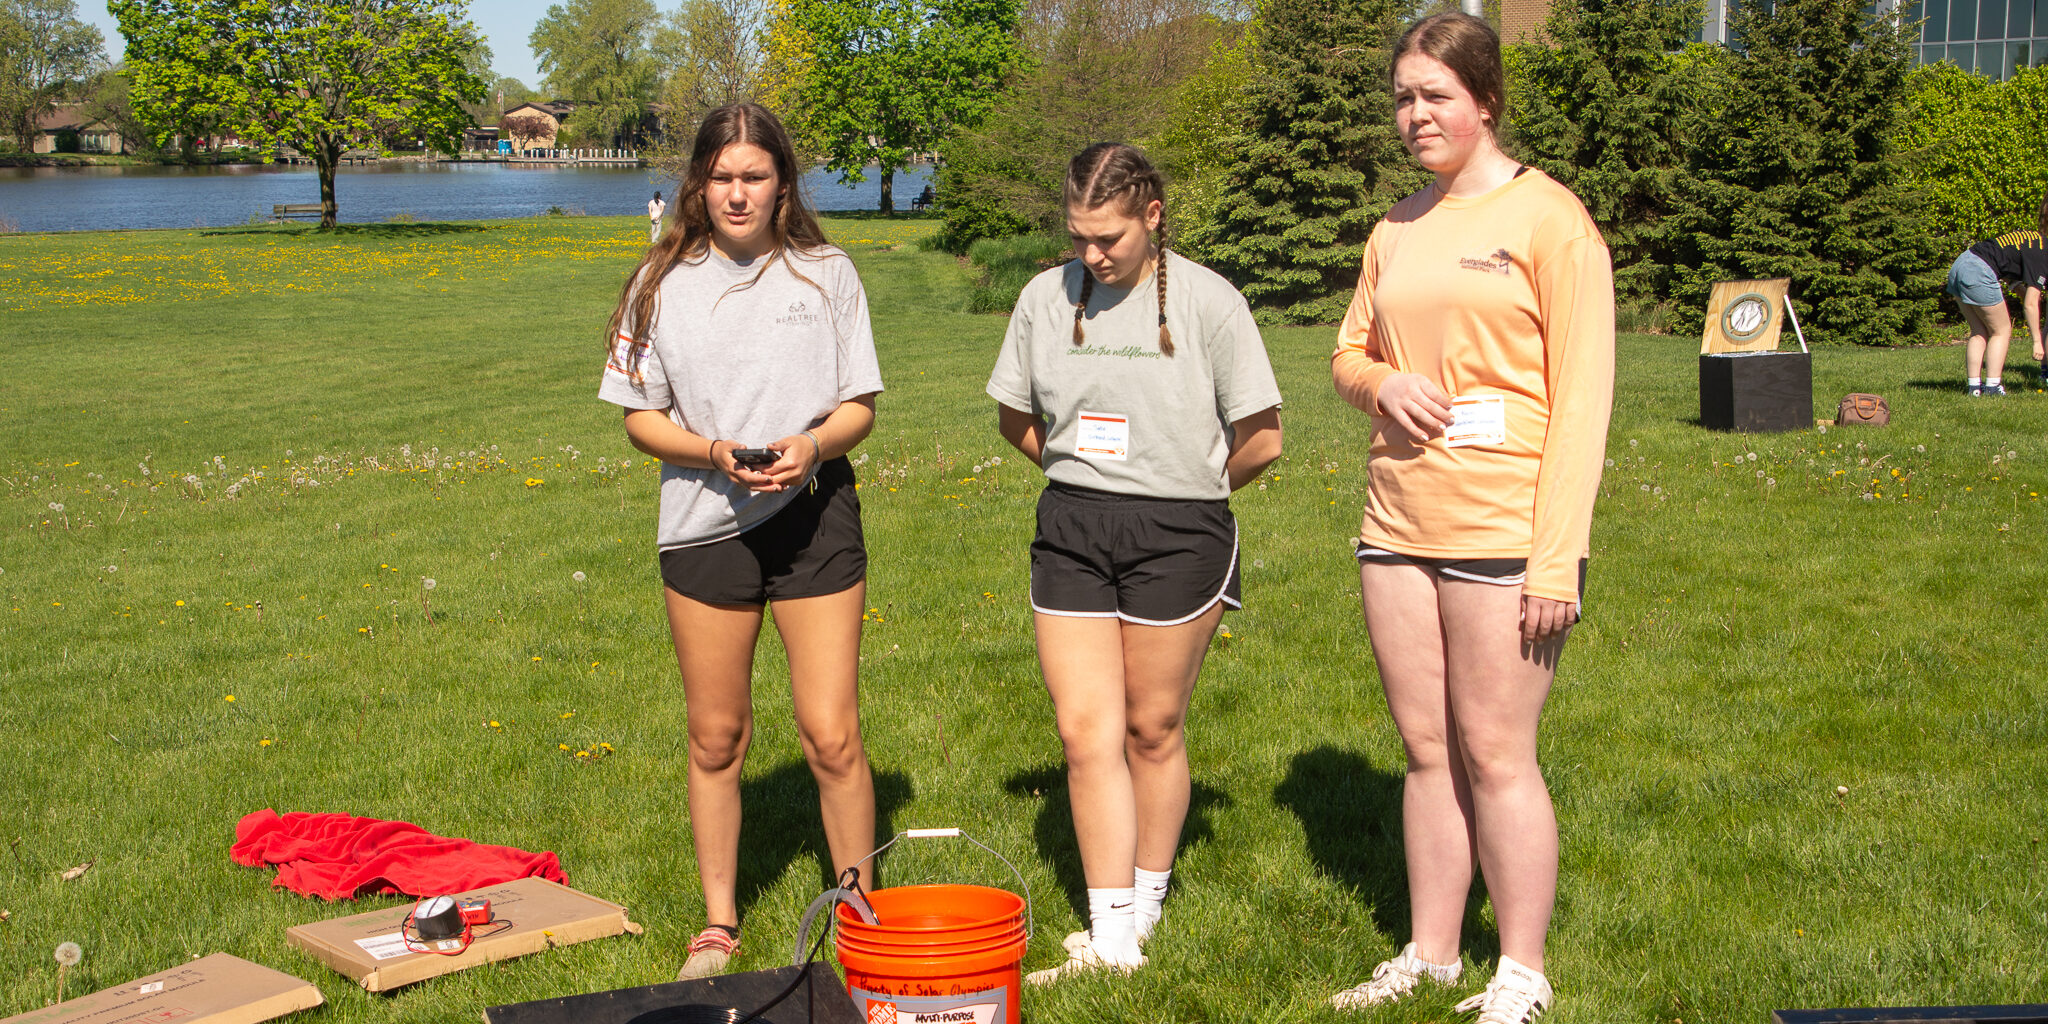 A group of high school girls discusses a solar-powered water heater during a sunny day at the Solar Olympics.